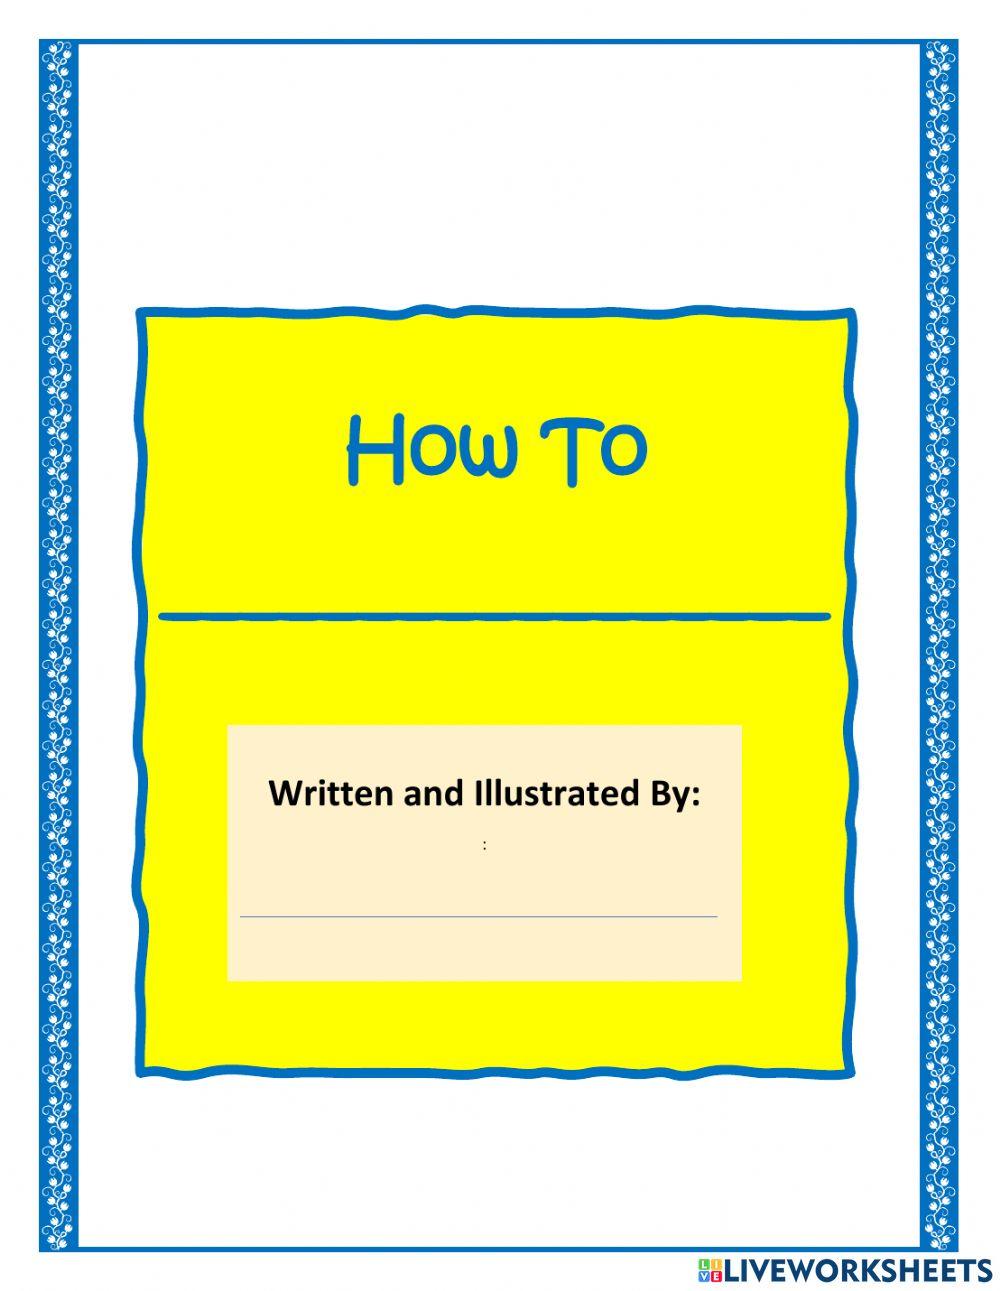 Writing a How to Book